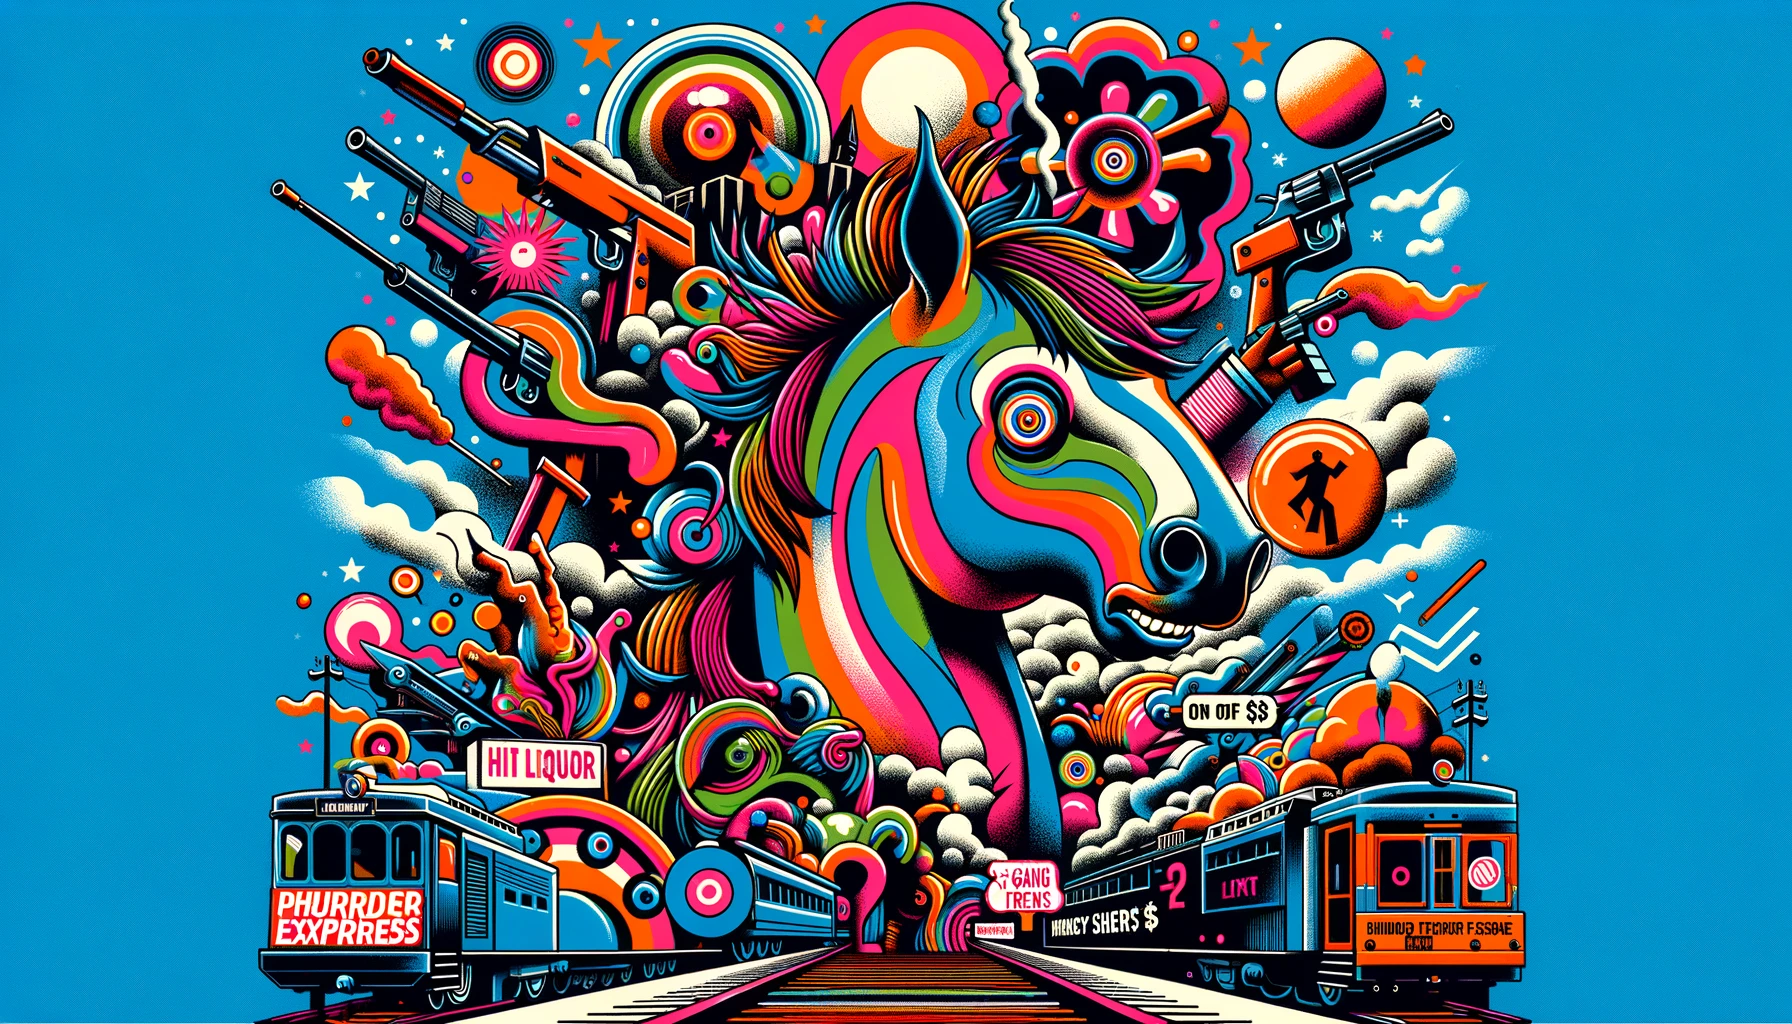 Create a wide 16:9 digital illustration as album art for Shudder to Think's Pony Express Record, without any text. Focus on surreal, abstract representations of the album's themes, drawing inspiration from song titles like 'Hit Liquor', 'Gang of $', and 'X-French Tee Shirt'. Use vibrant colors and dynamic shapes to convey the eclectic and experimental nature of the album, while keeping the design purely visual without text.